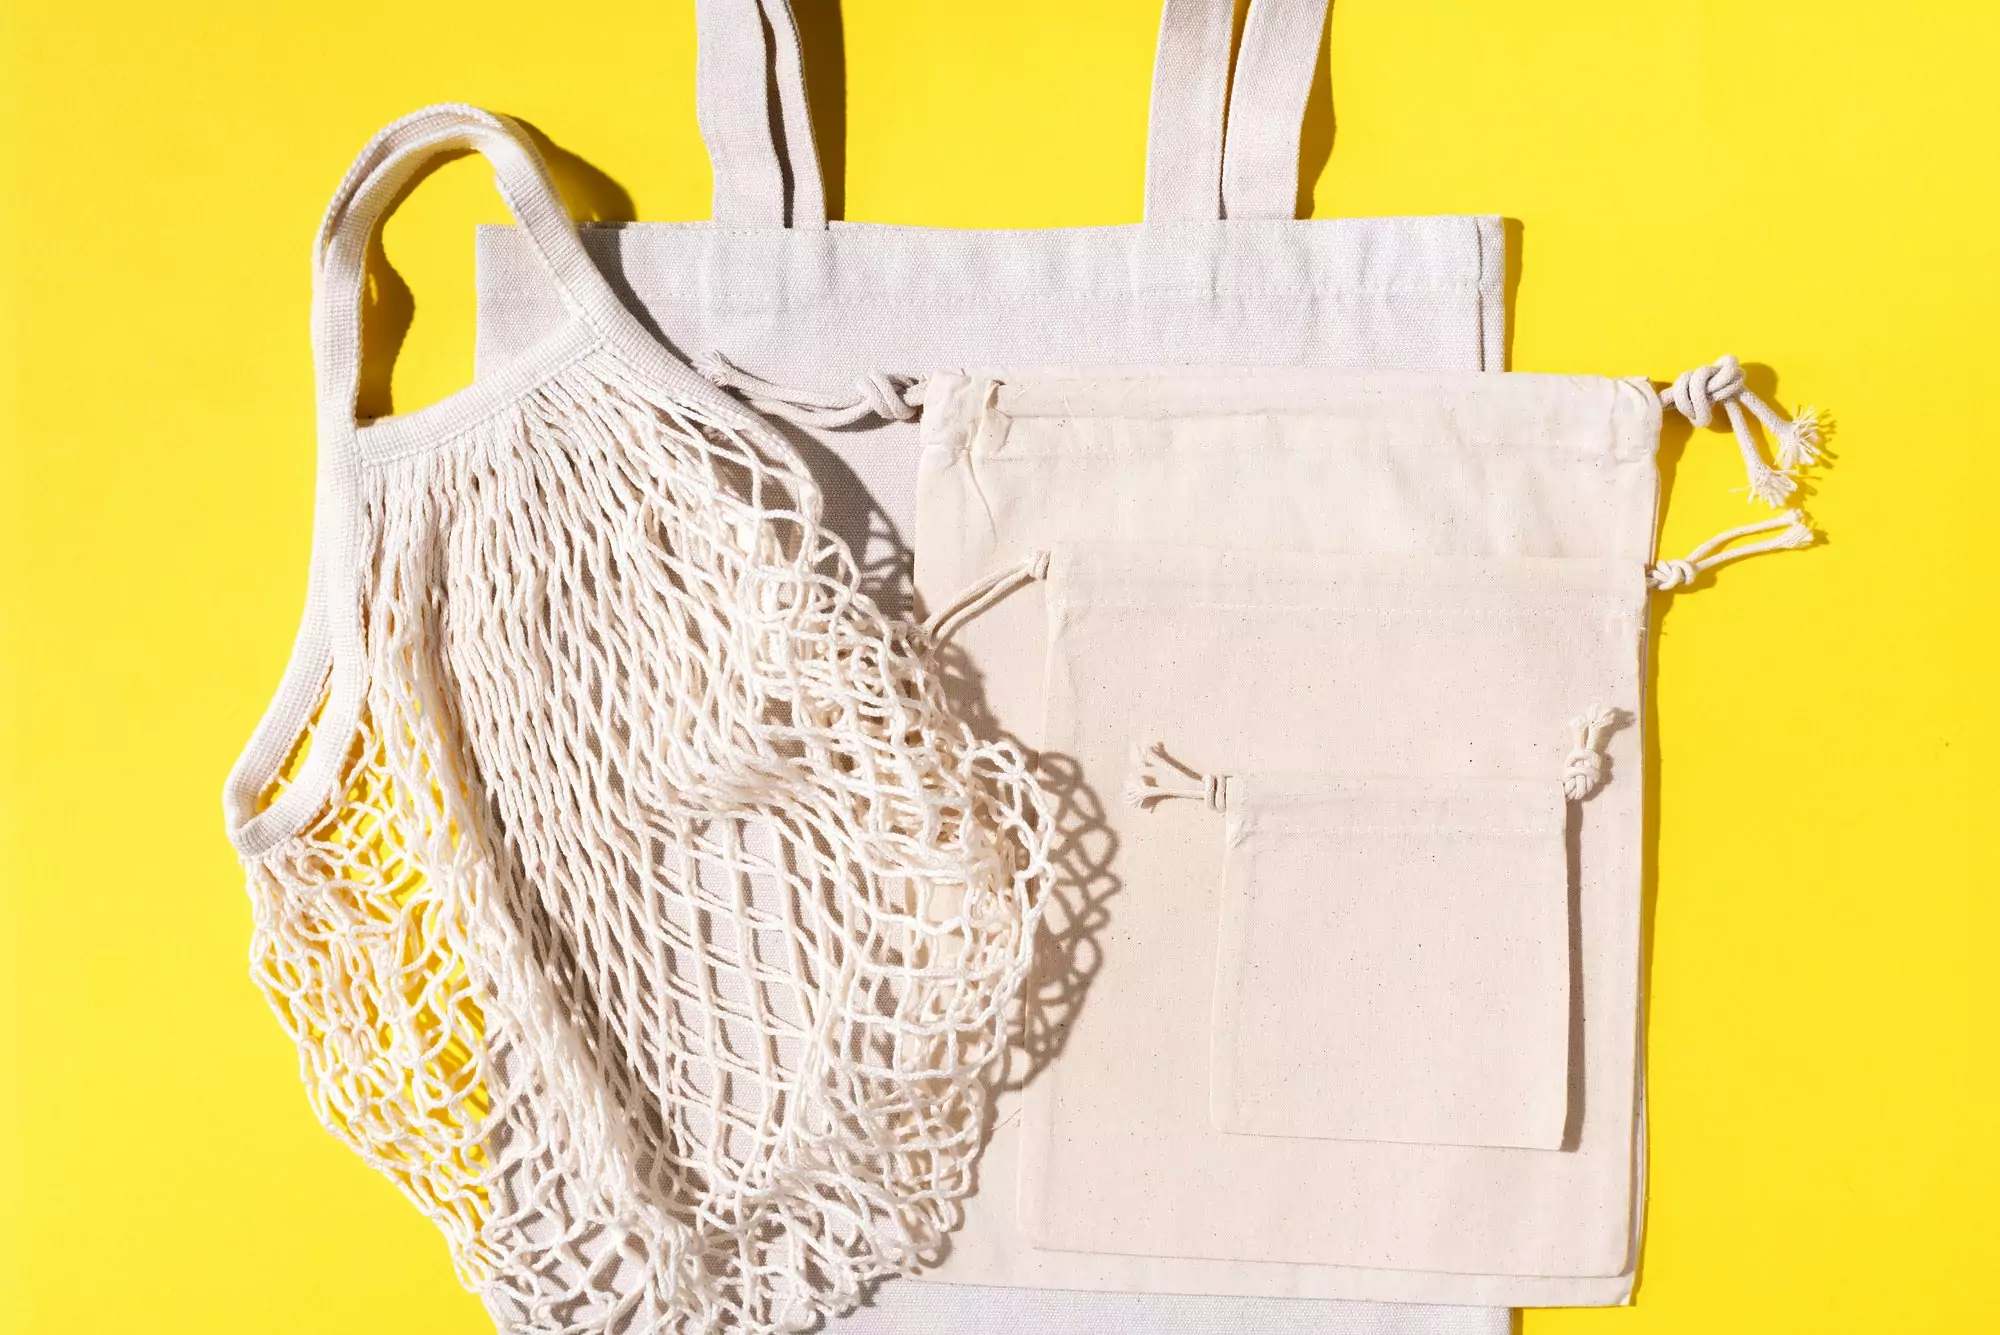 Mesh and cotton bags with on yellow background. Sustainable lifestyle. Zero waste concept. No